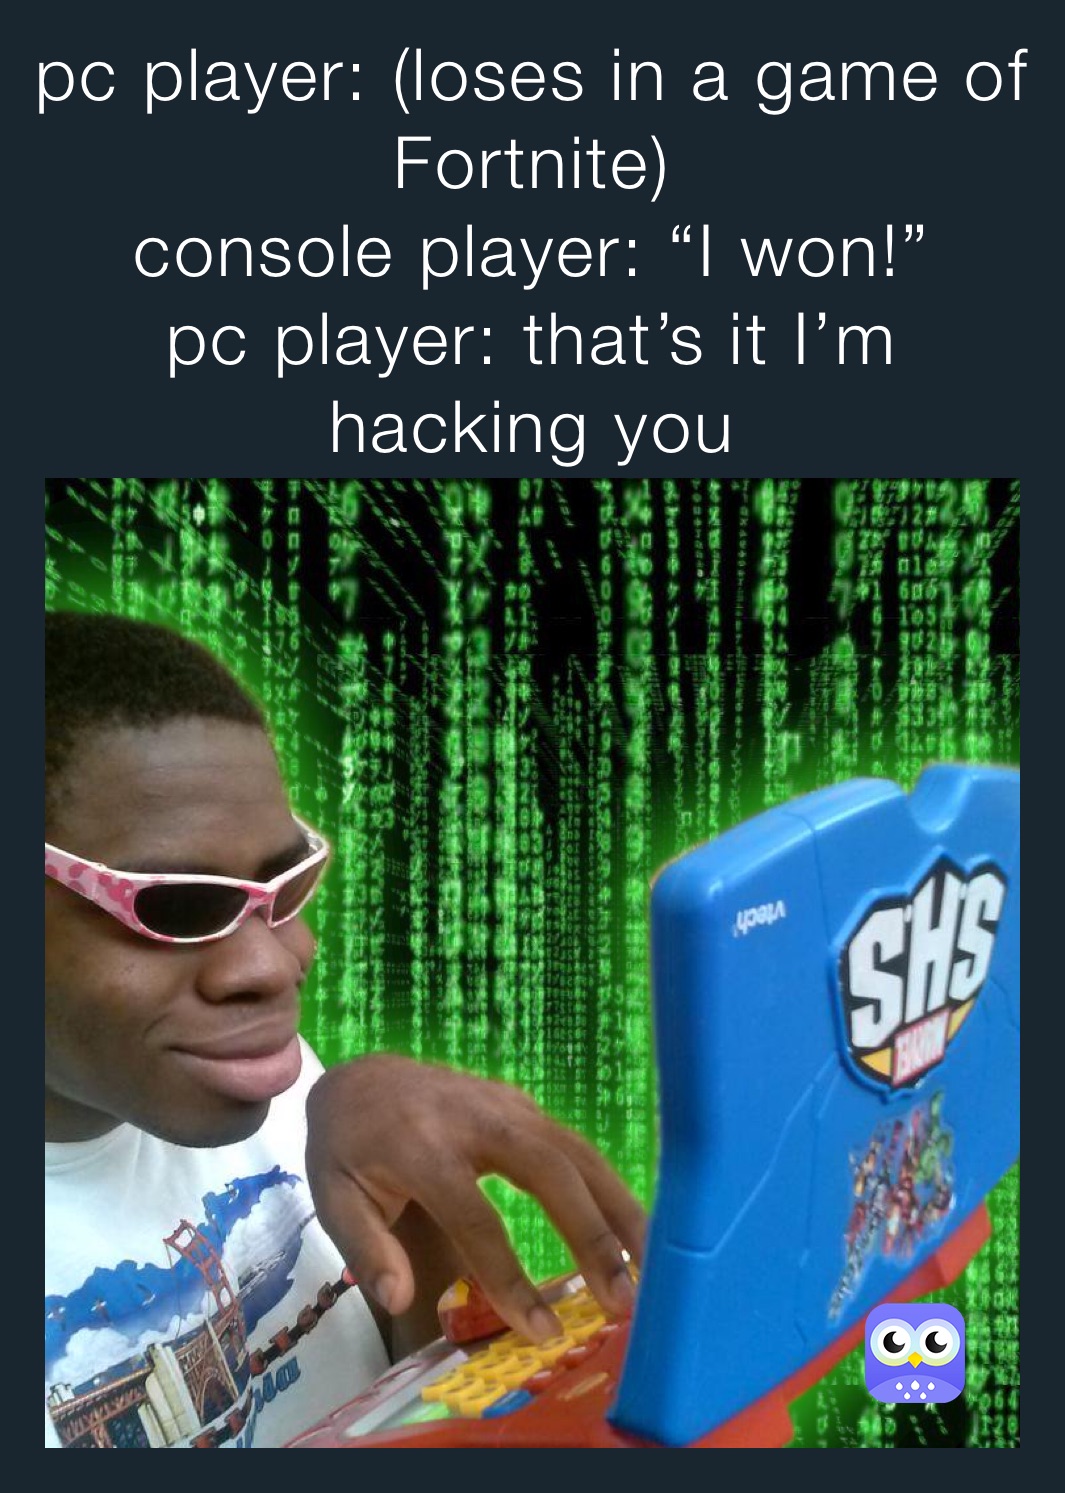 pc player: (loses in a game of Fortnite)
console player: “I won!”
pc player: that’s it I’m hacking you  